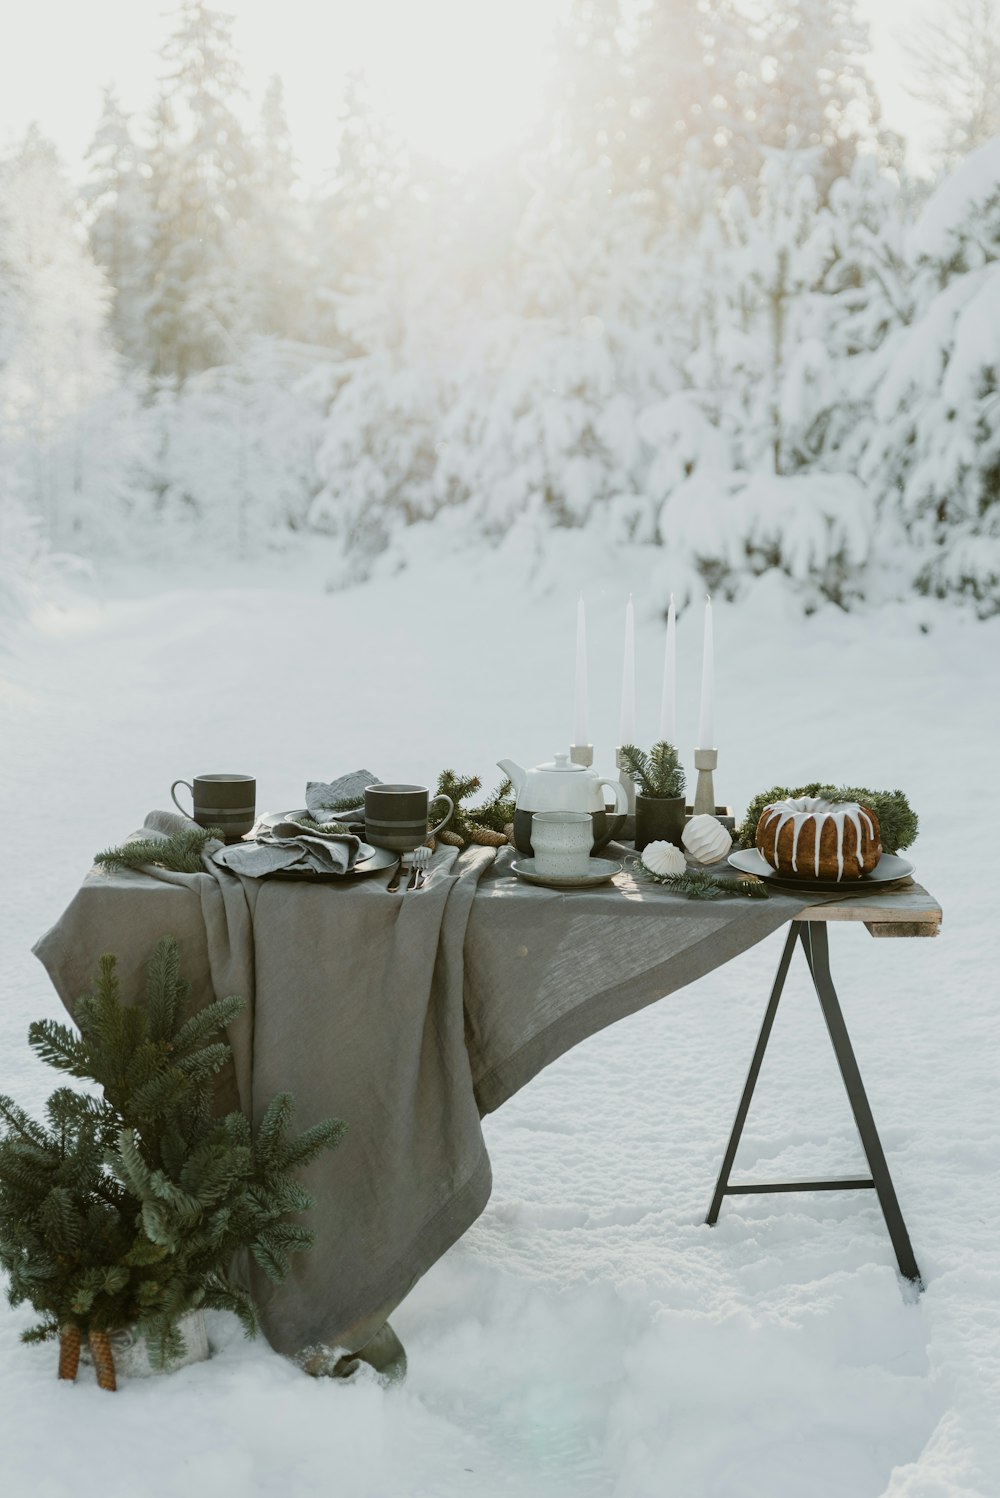 a table with a cloth on it in the snow